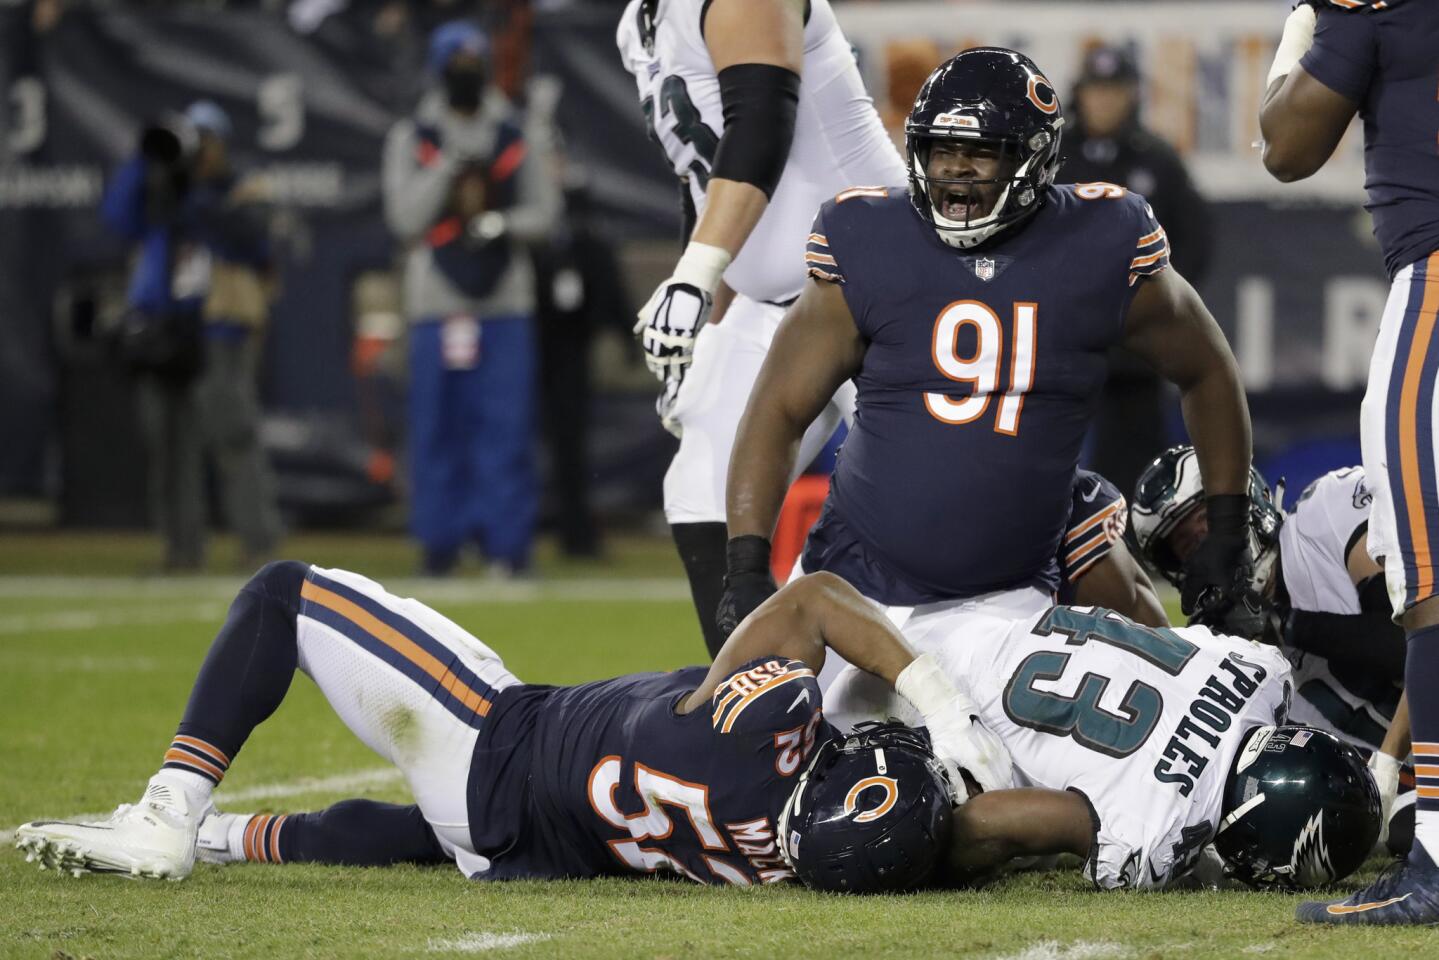 Chicago Bears nose tackle Eddie Goldman (91) reacts as Chicago Bears linebacker Khalil Mack (52) stops Philadelphia Eagles running back Darren Sproles (43) during the second half of an NFL wild-card playoff football game Sunday, Jan. 6, 2019, in Chicago.